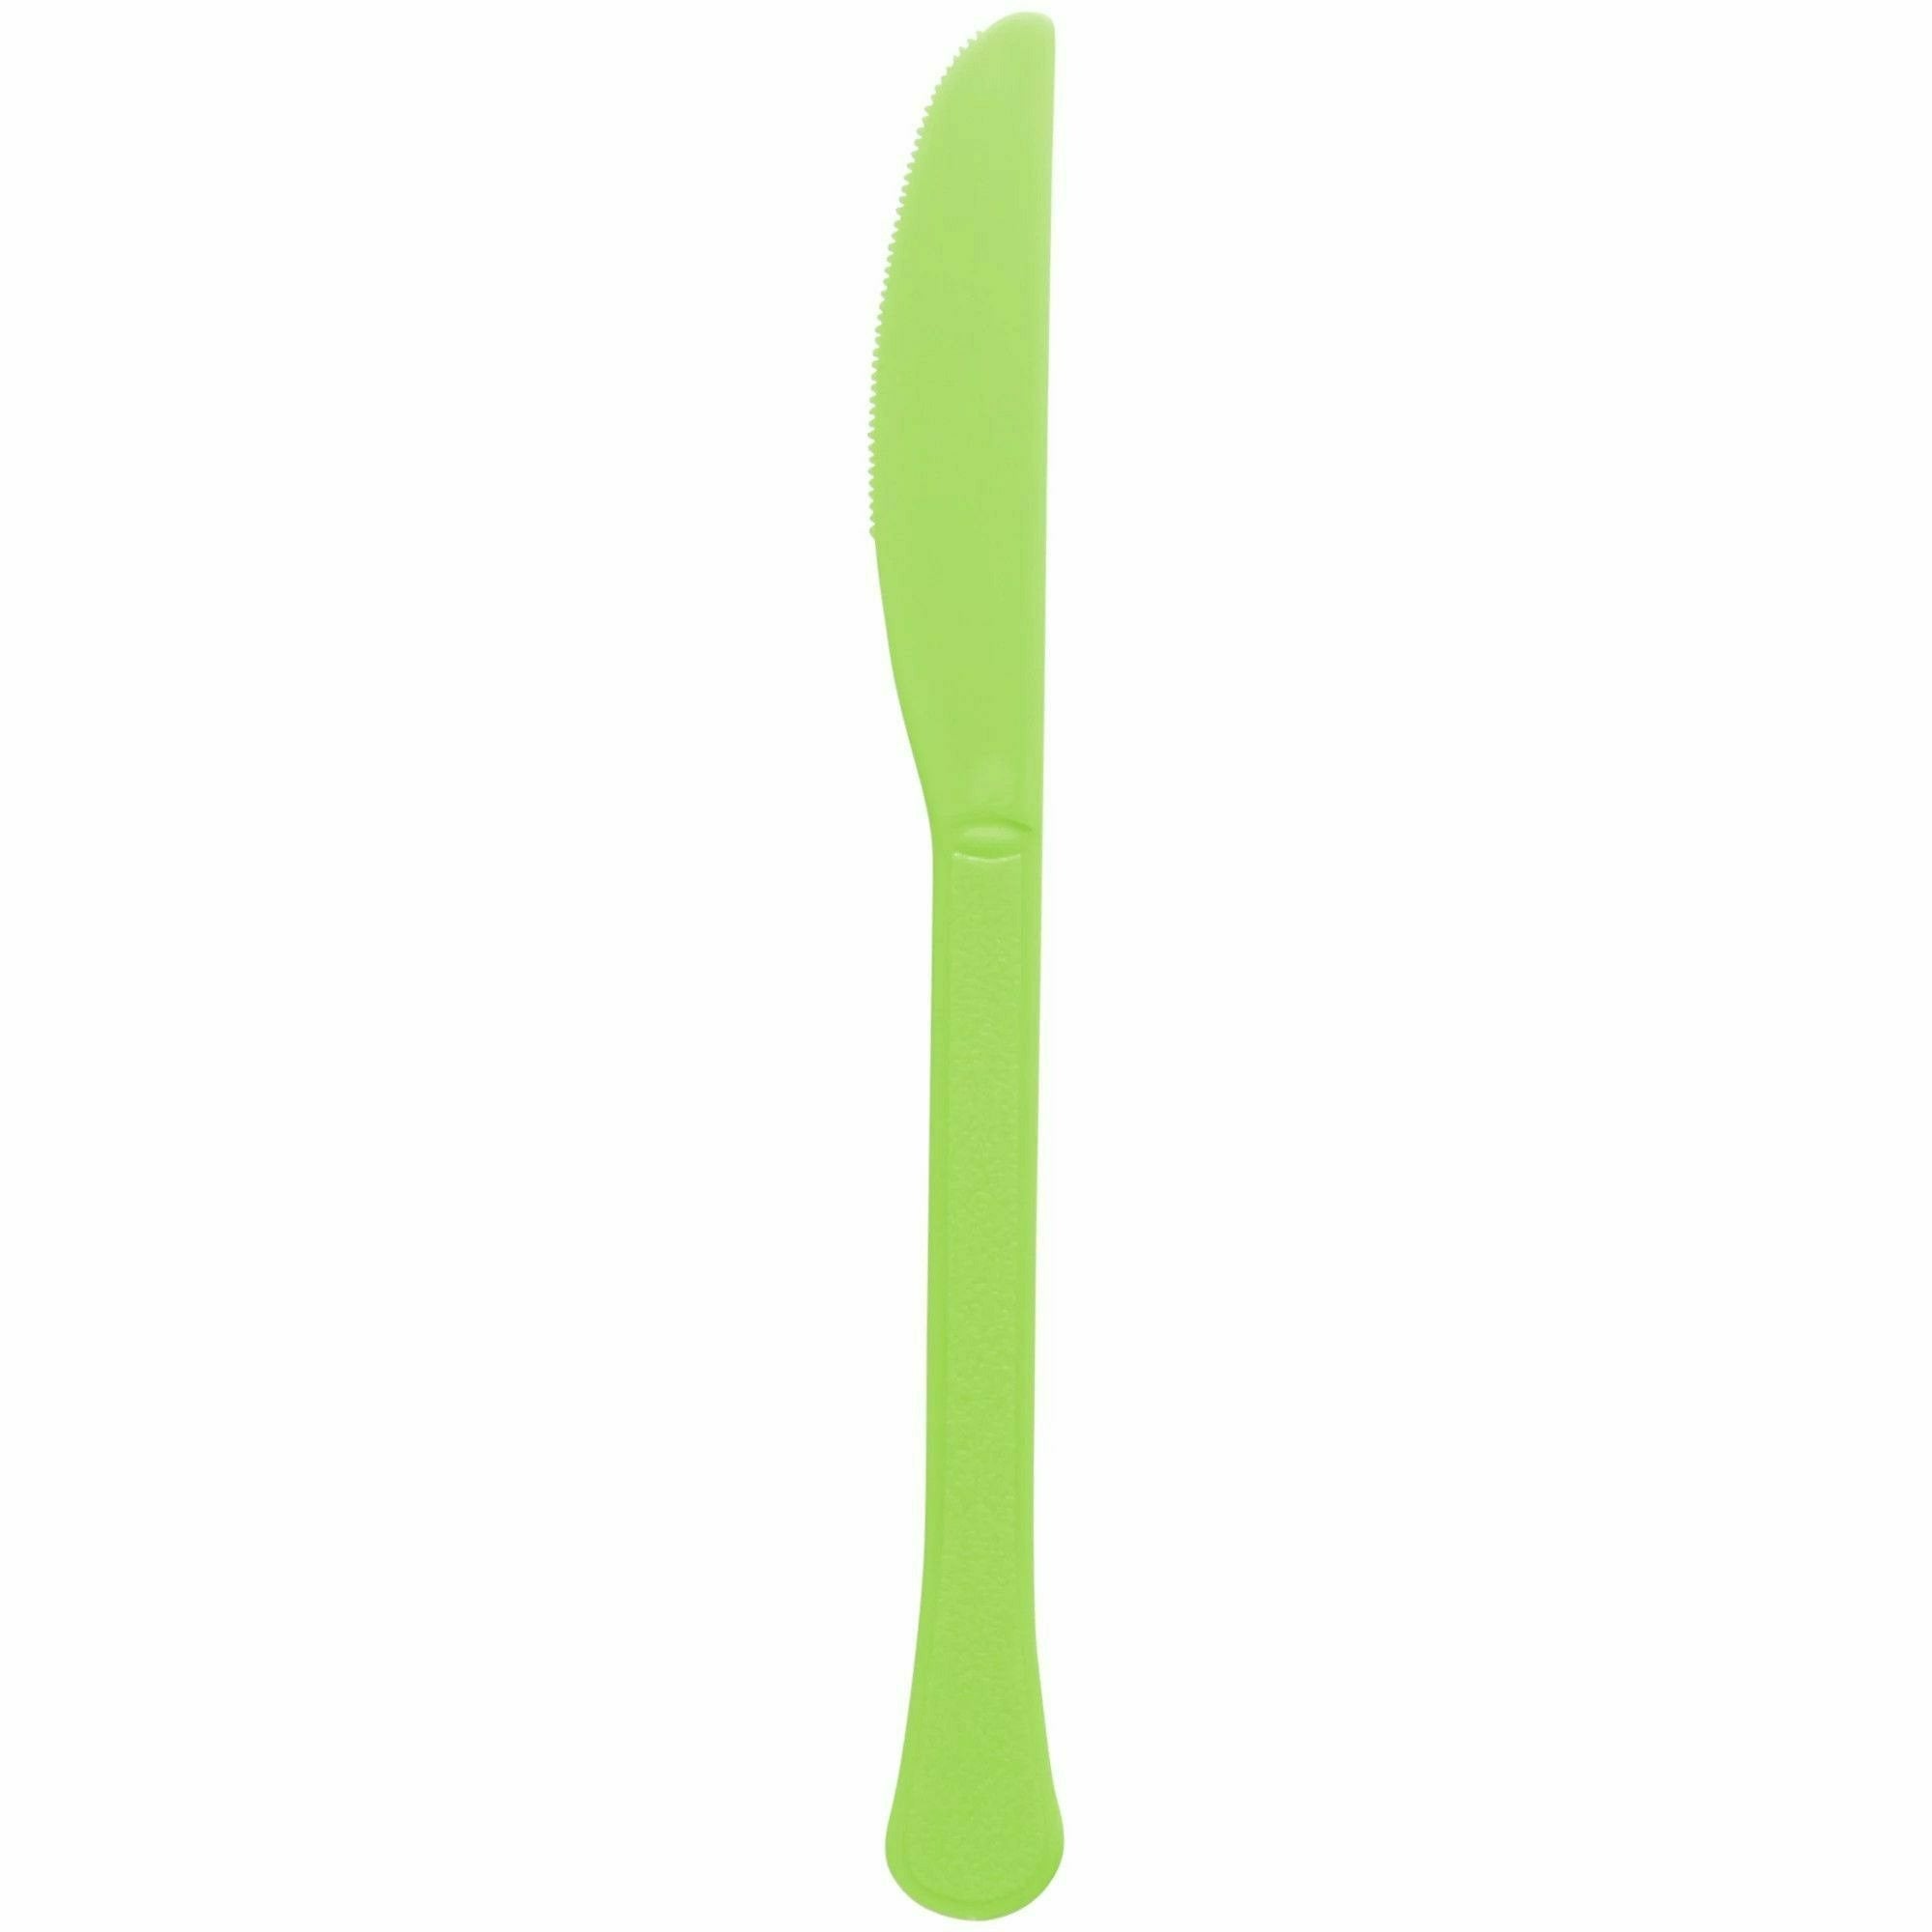 Amscan BASIC Kiwi Green - Boxed, Heavy Weight Knives, 20 Ct.